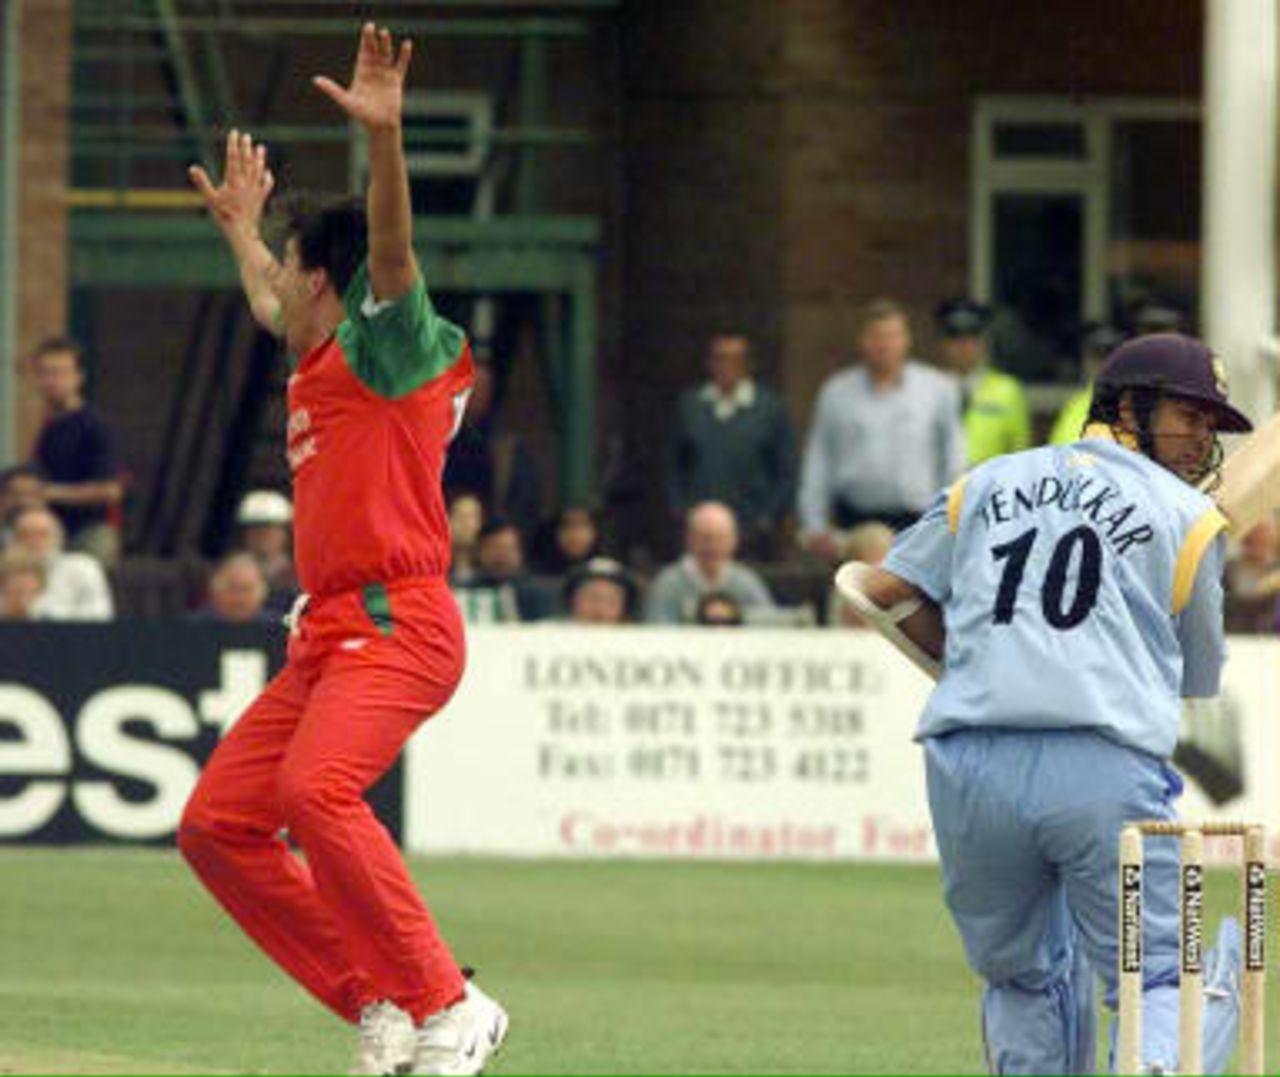 Ormond appeals succesfully for lbw against Tendulkar   - India v Leicestershire World Cup warm-up game, May 7 1999